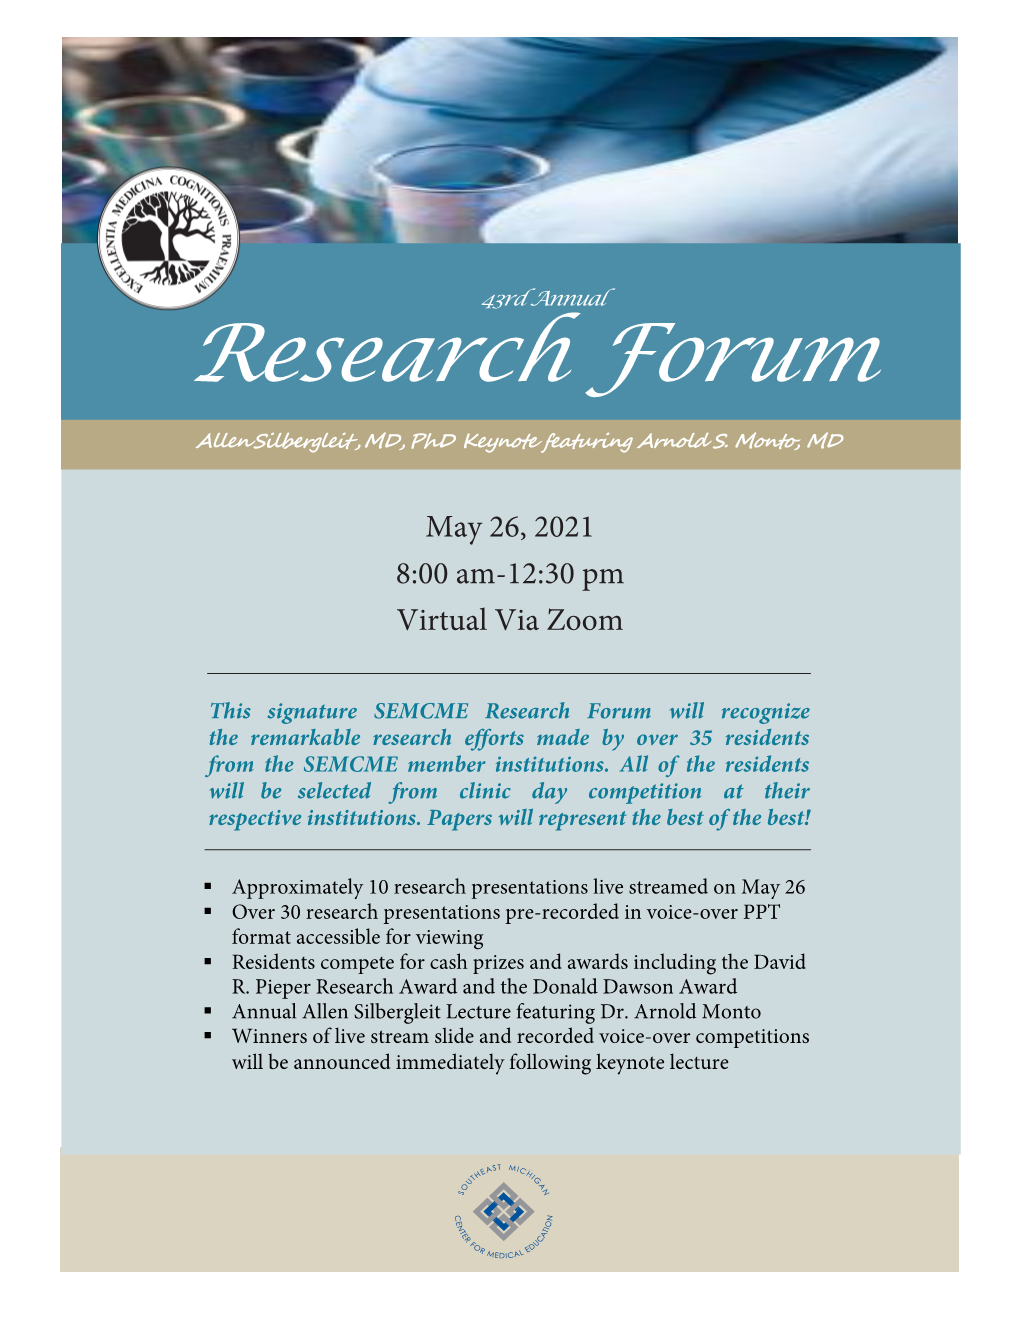 2021 Research Forum and Keynote Lecture